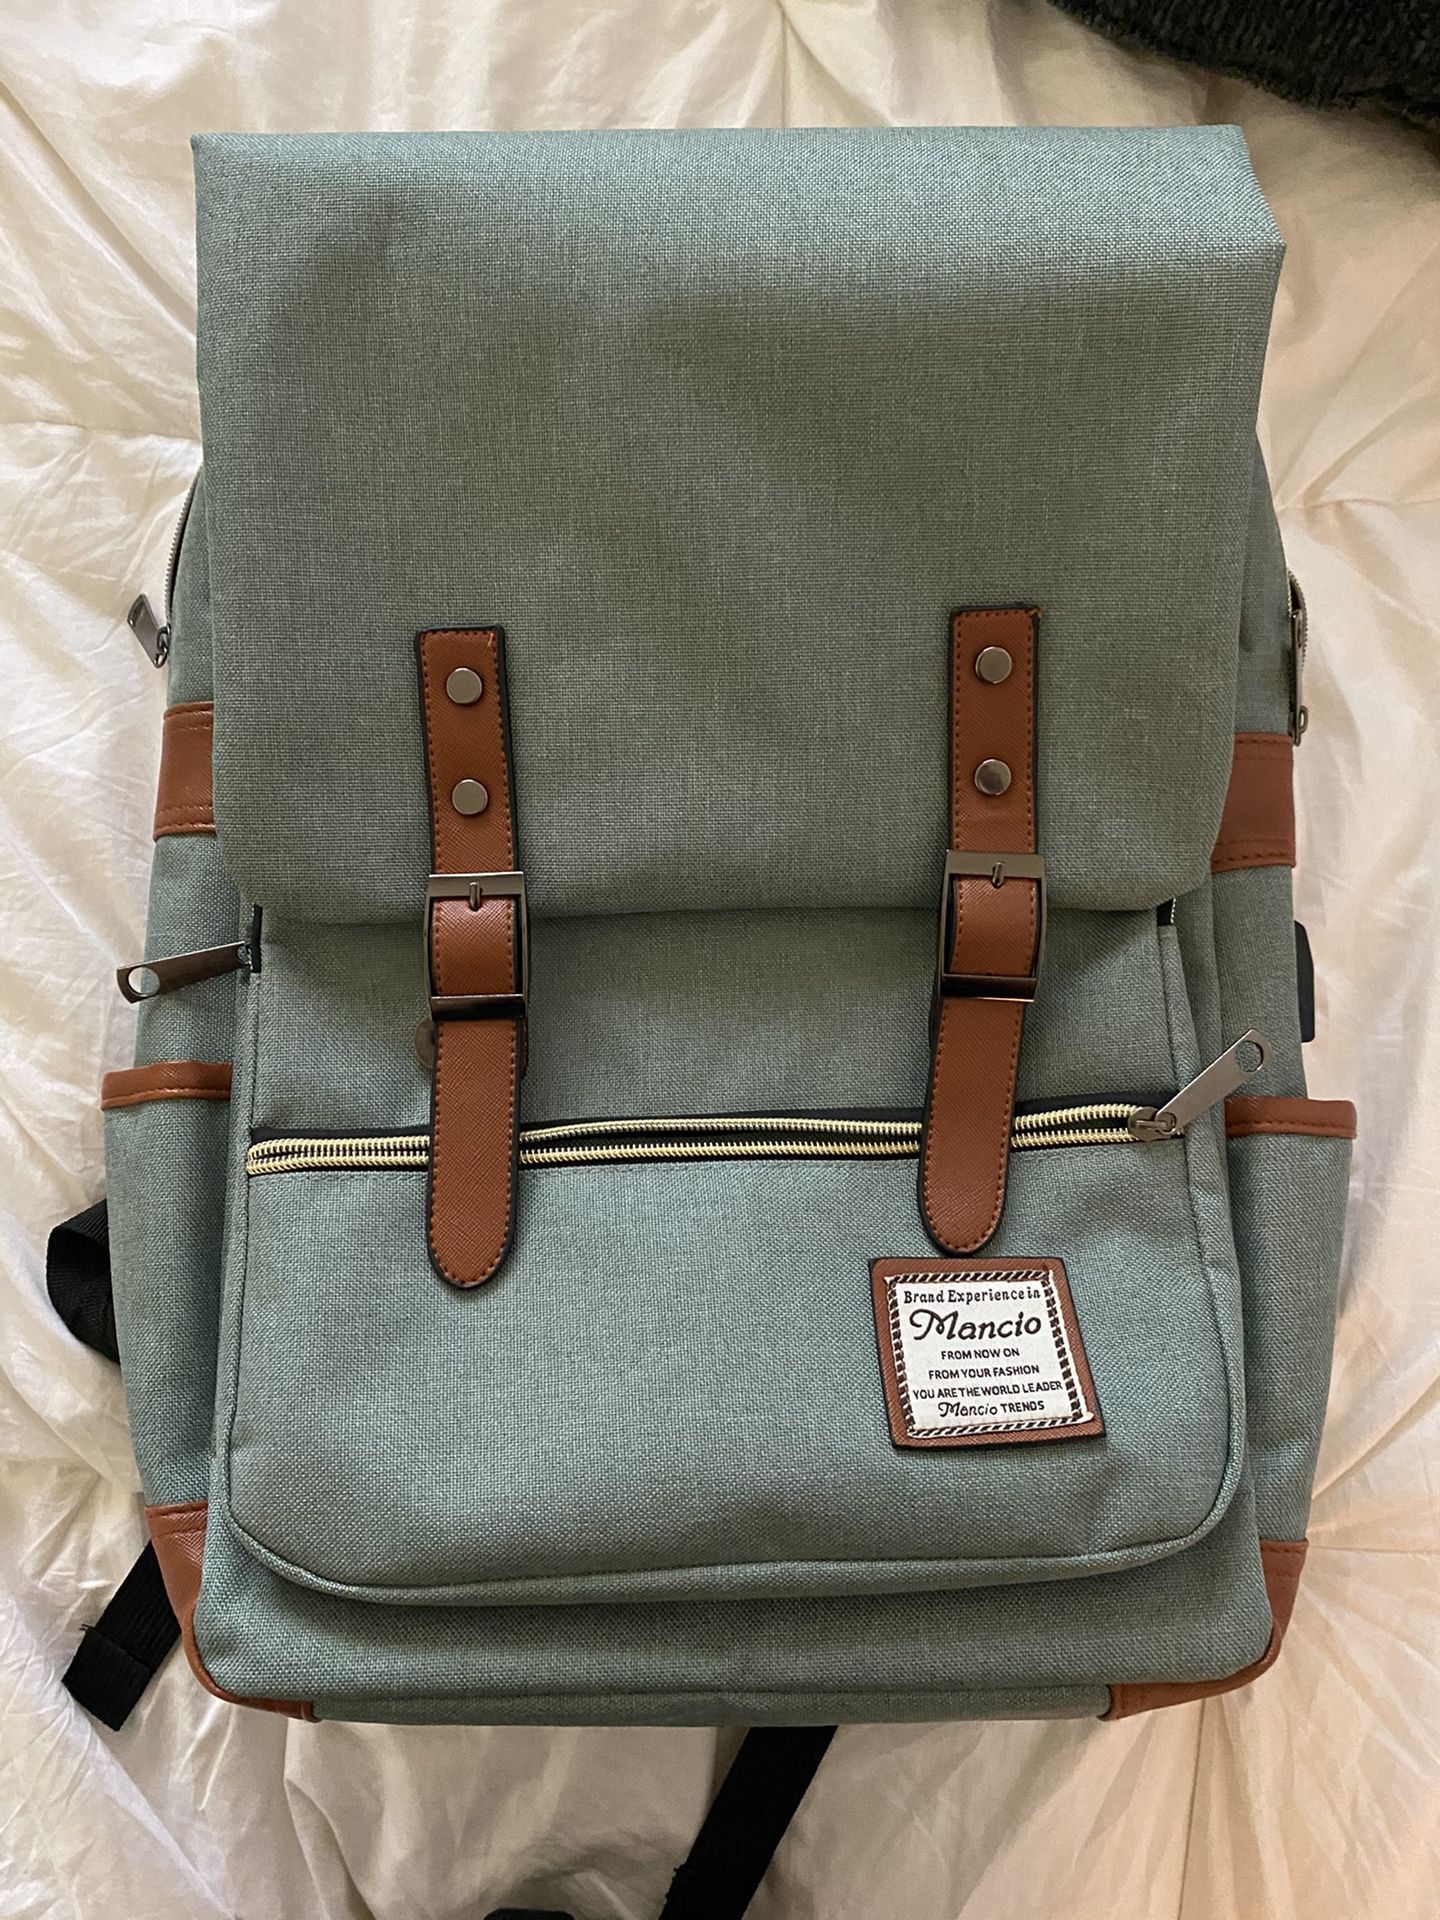 MacBook Laptop backpack with USB connector